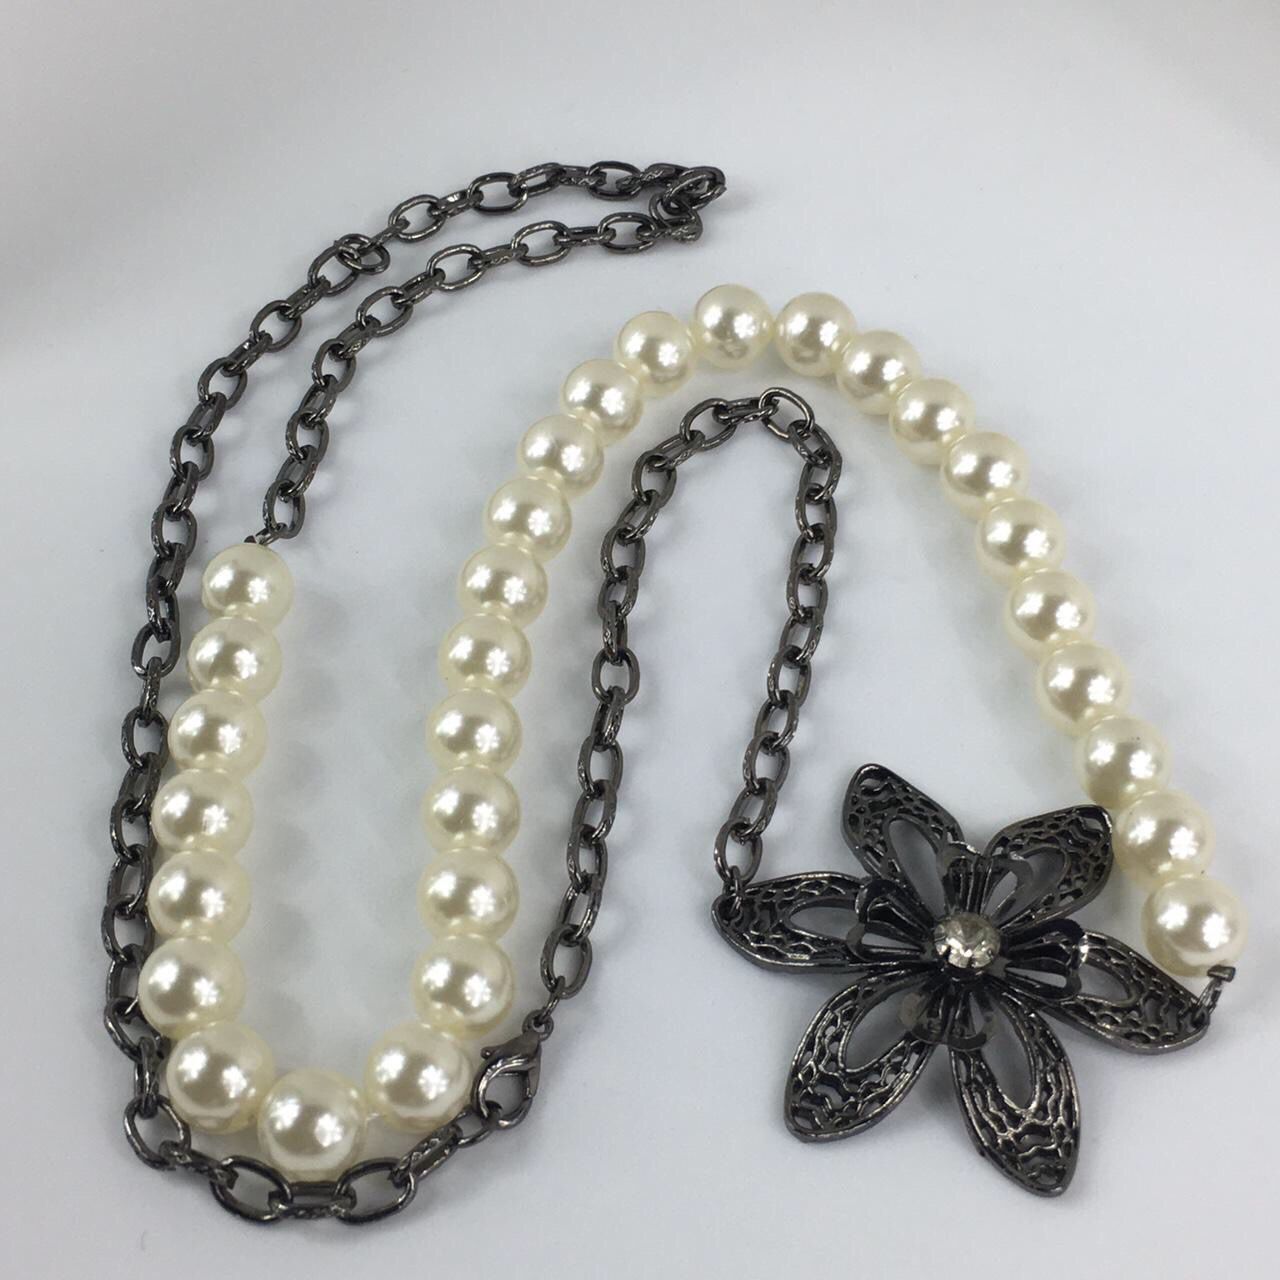 BEAUTIFUL WOMENS PEARLS NECKLACE 30” LONG